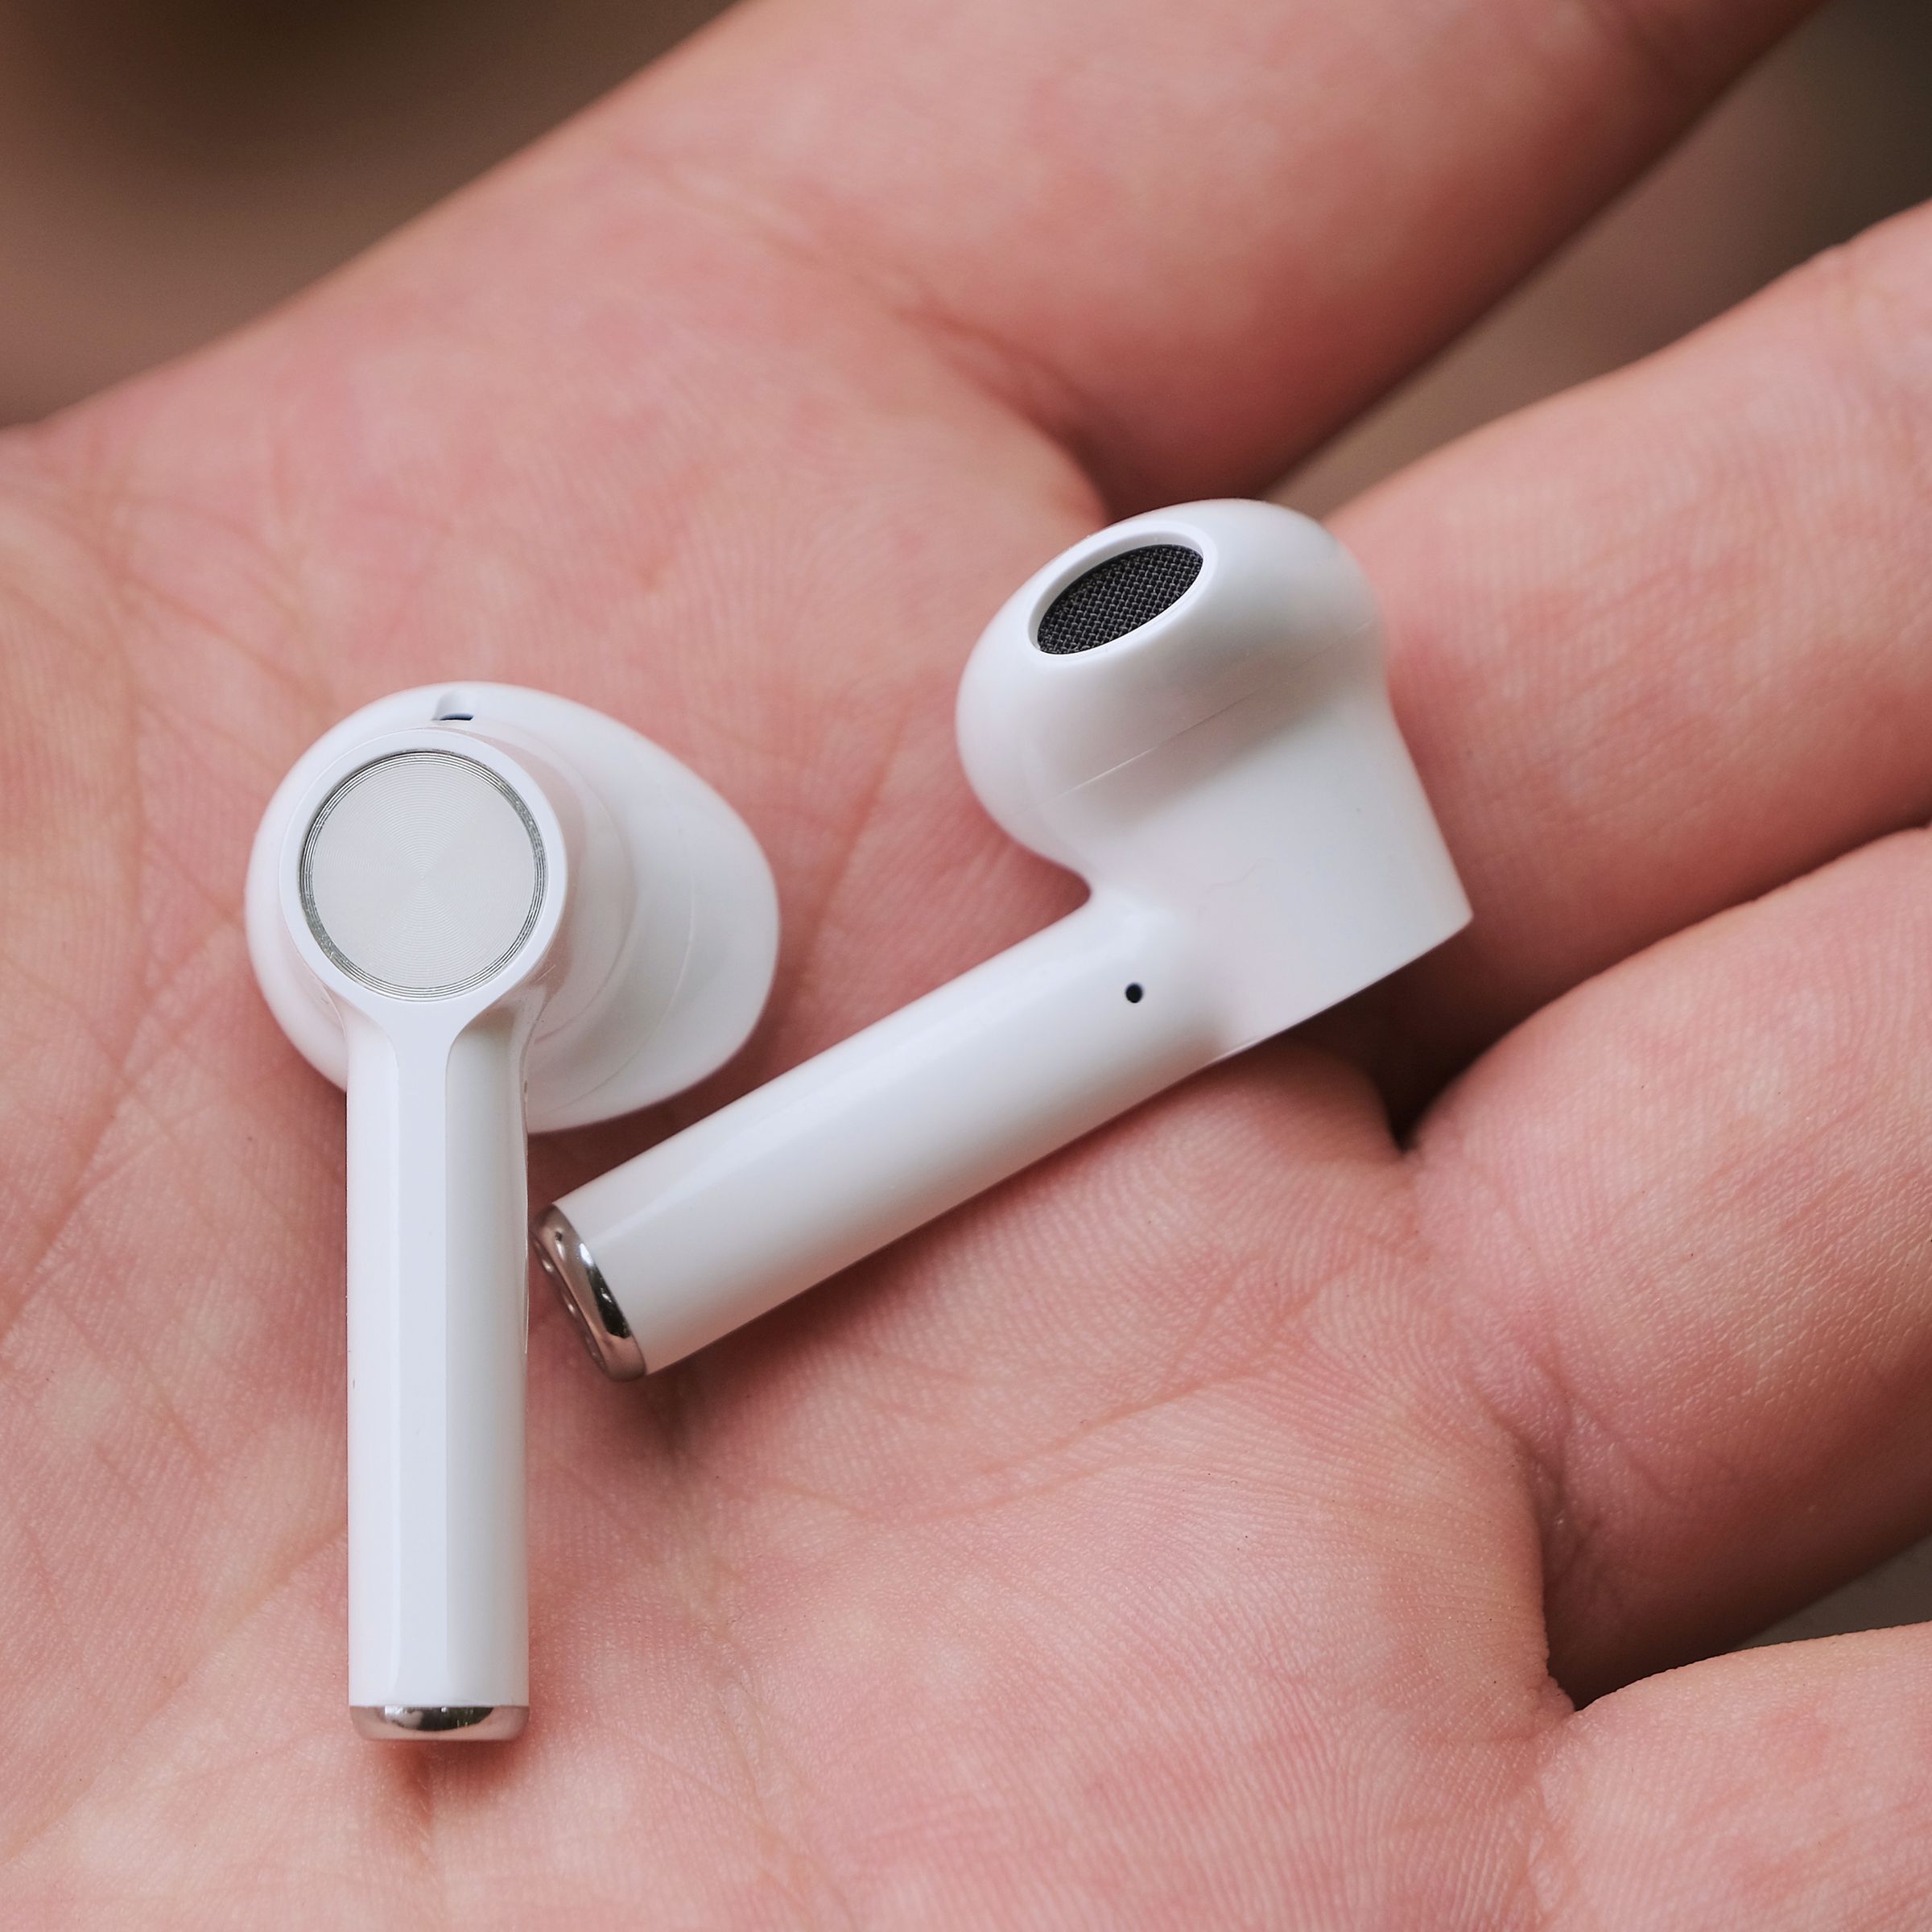 A close-up photo of the OnePlus earbuds in a person’s hand.